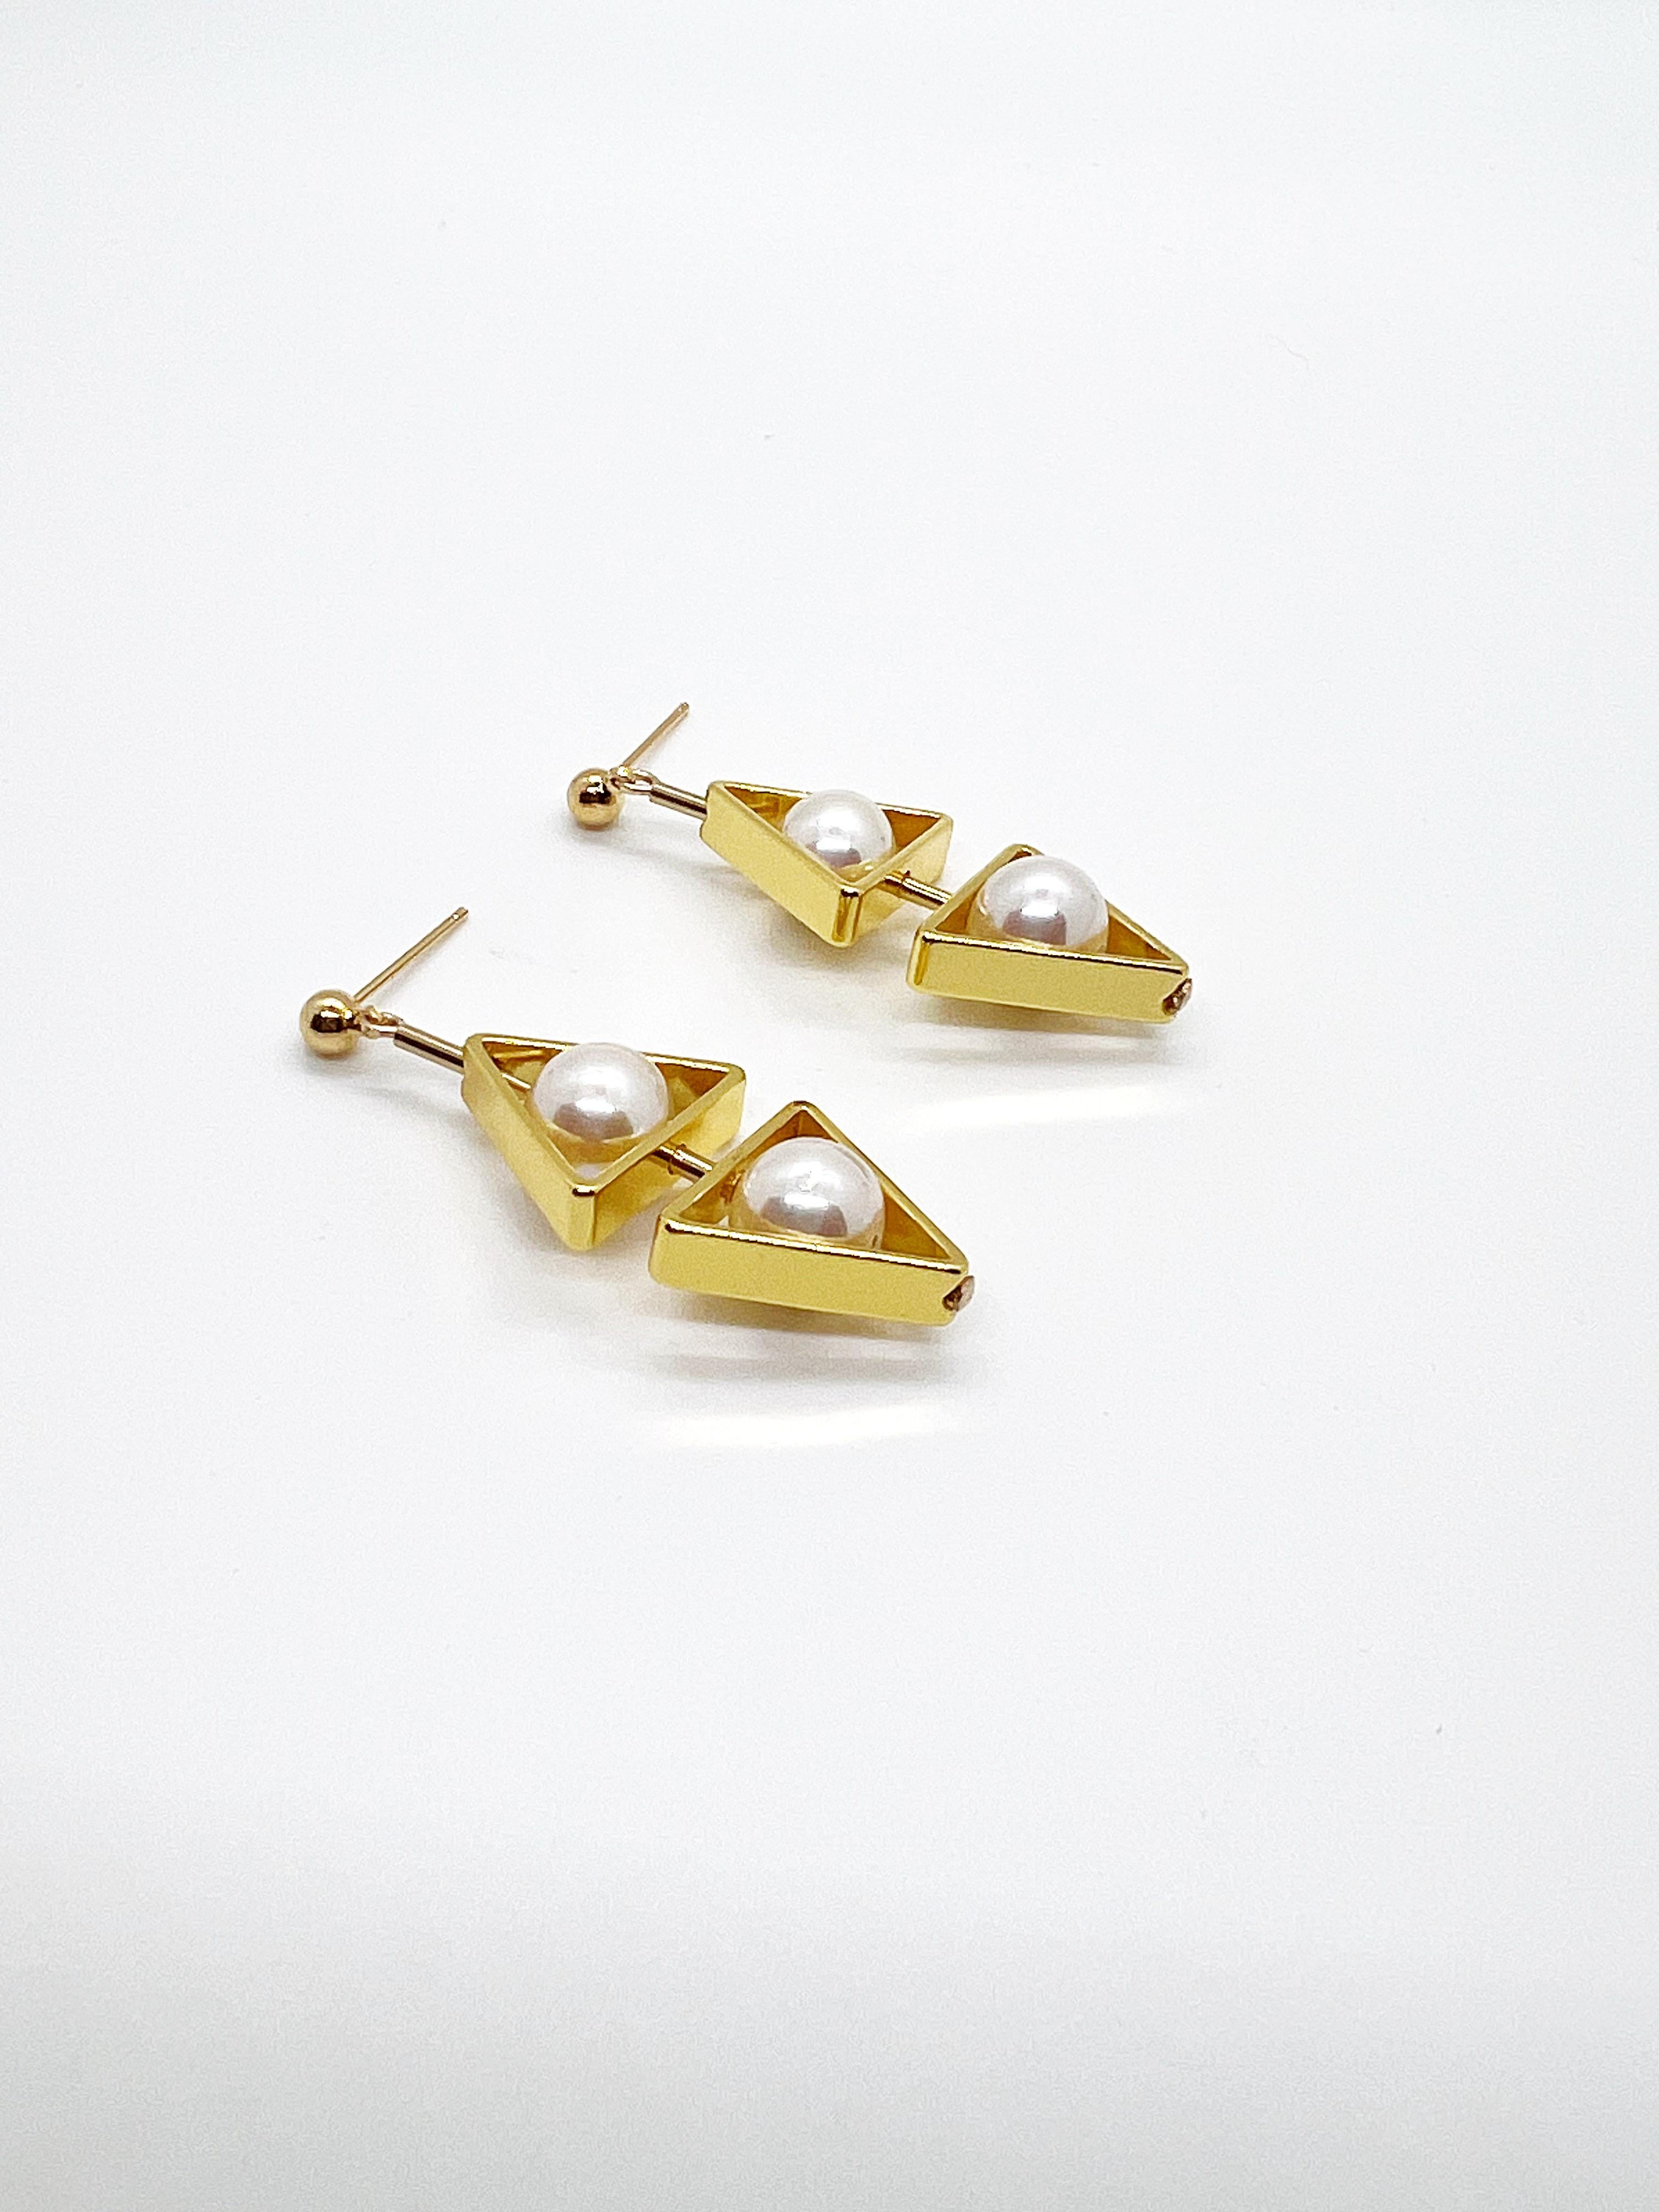 Double Triangle Pearl Earrings In New Condition For Sale In Monrovia, CA